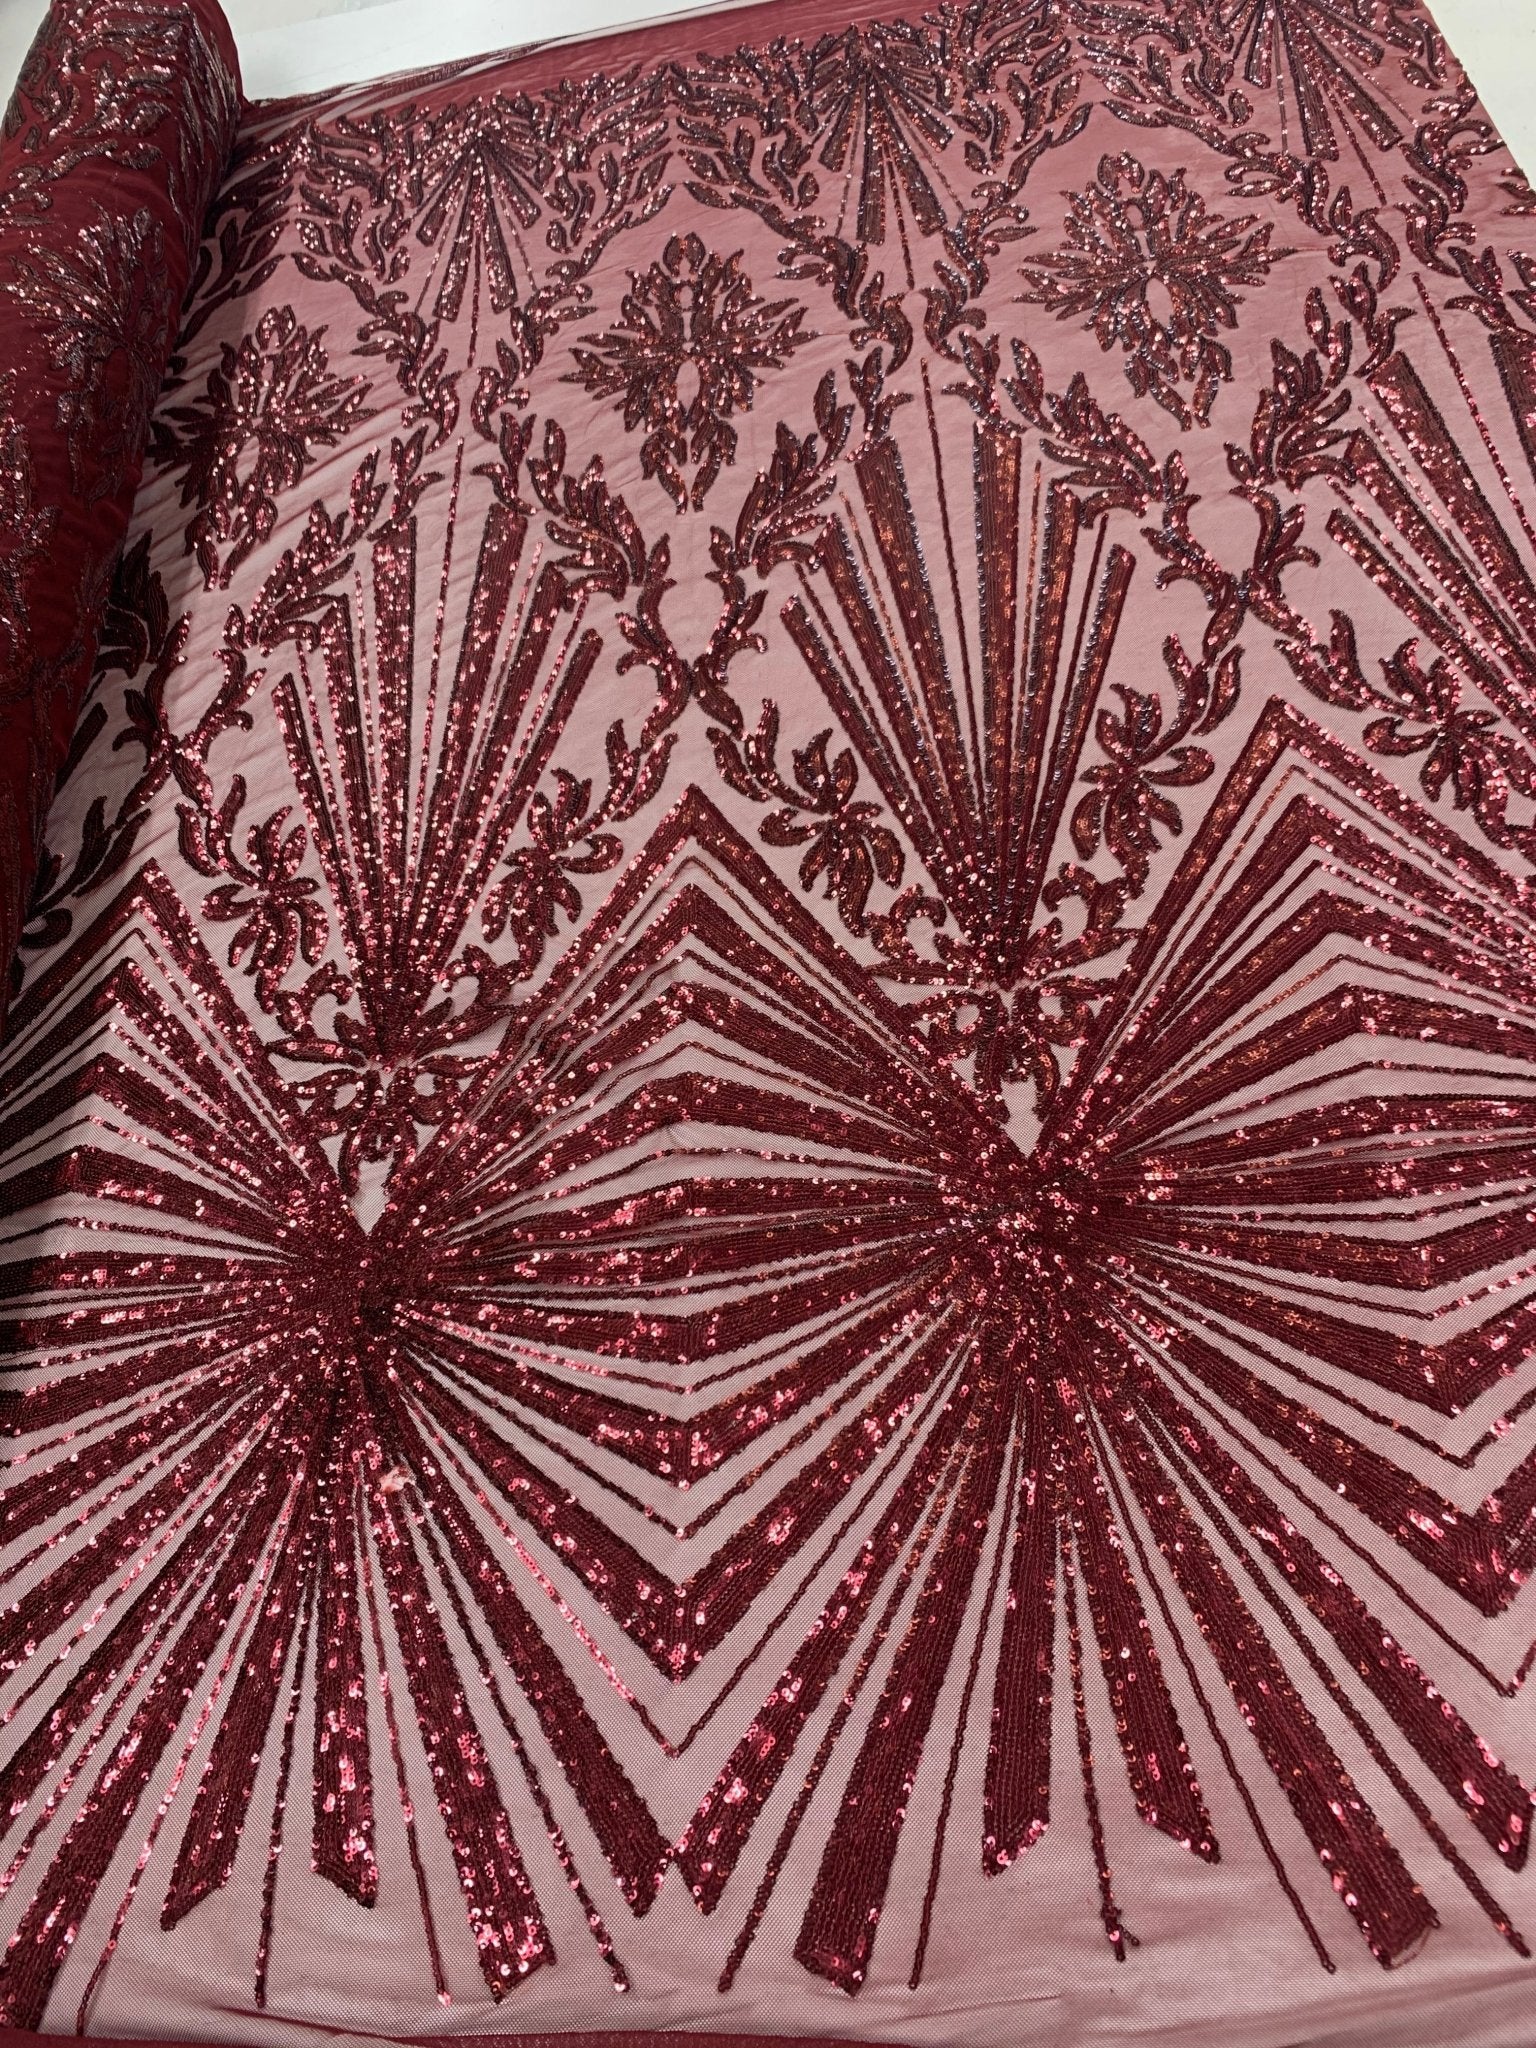 French Embroidery Stretch Sequins Fabric By The Yard on a Mesh LaceICEFABRICICE FABRICSBurgundyFrench Embroidery Stretch Sequins Fabric By The Yard on a Mesh Lace ICEFABRIC Burgundy